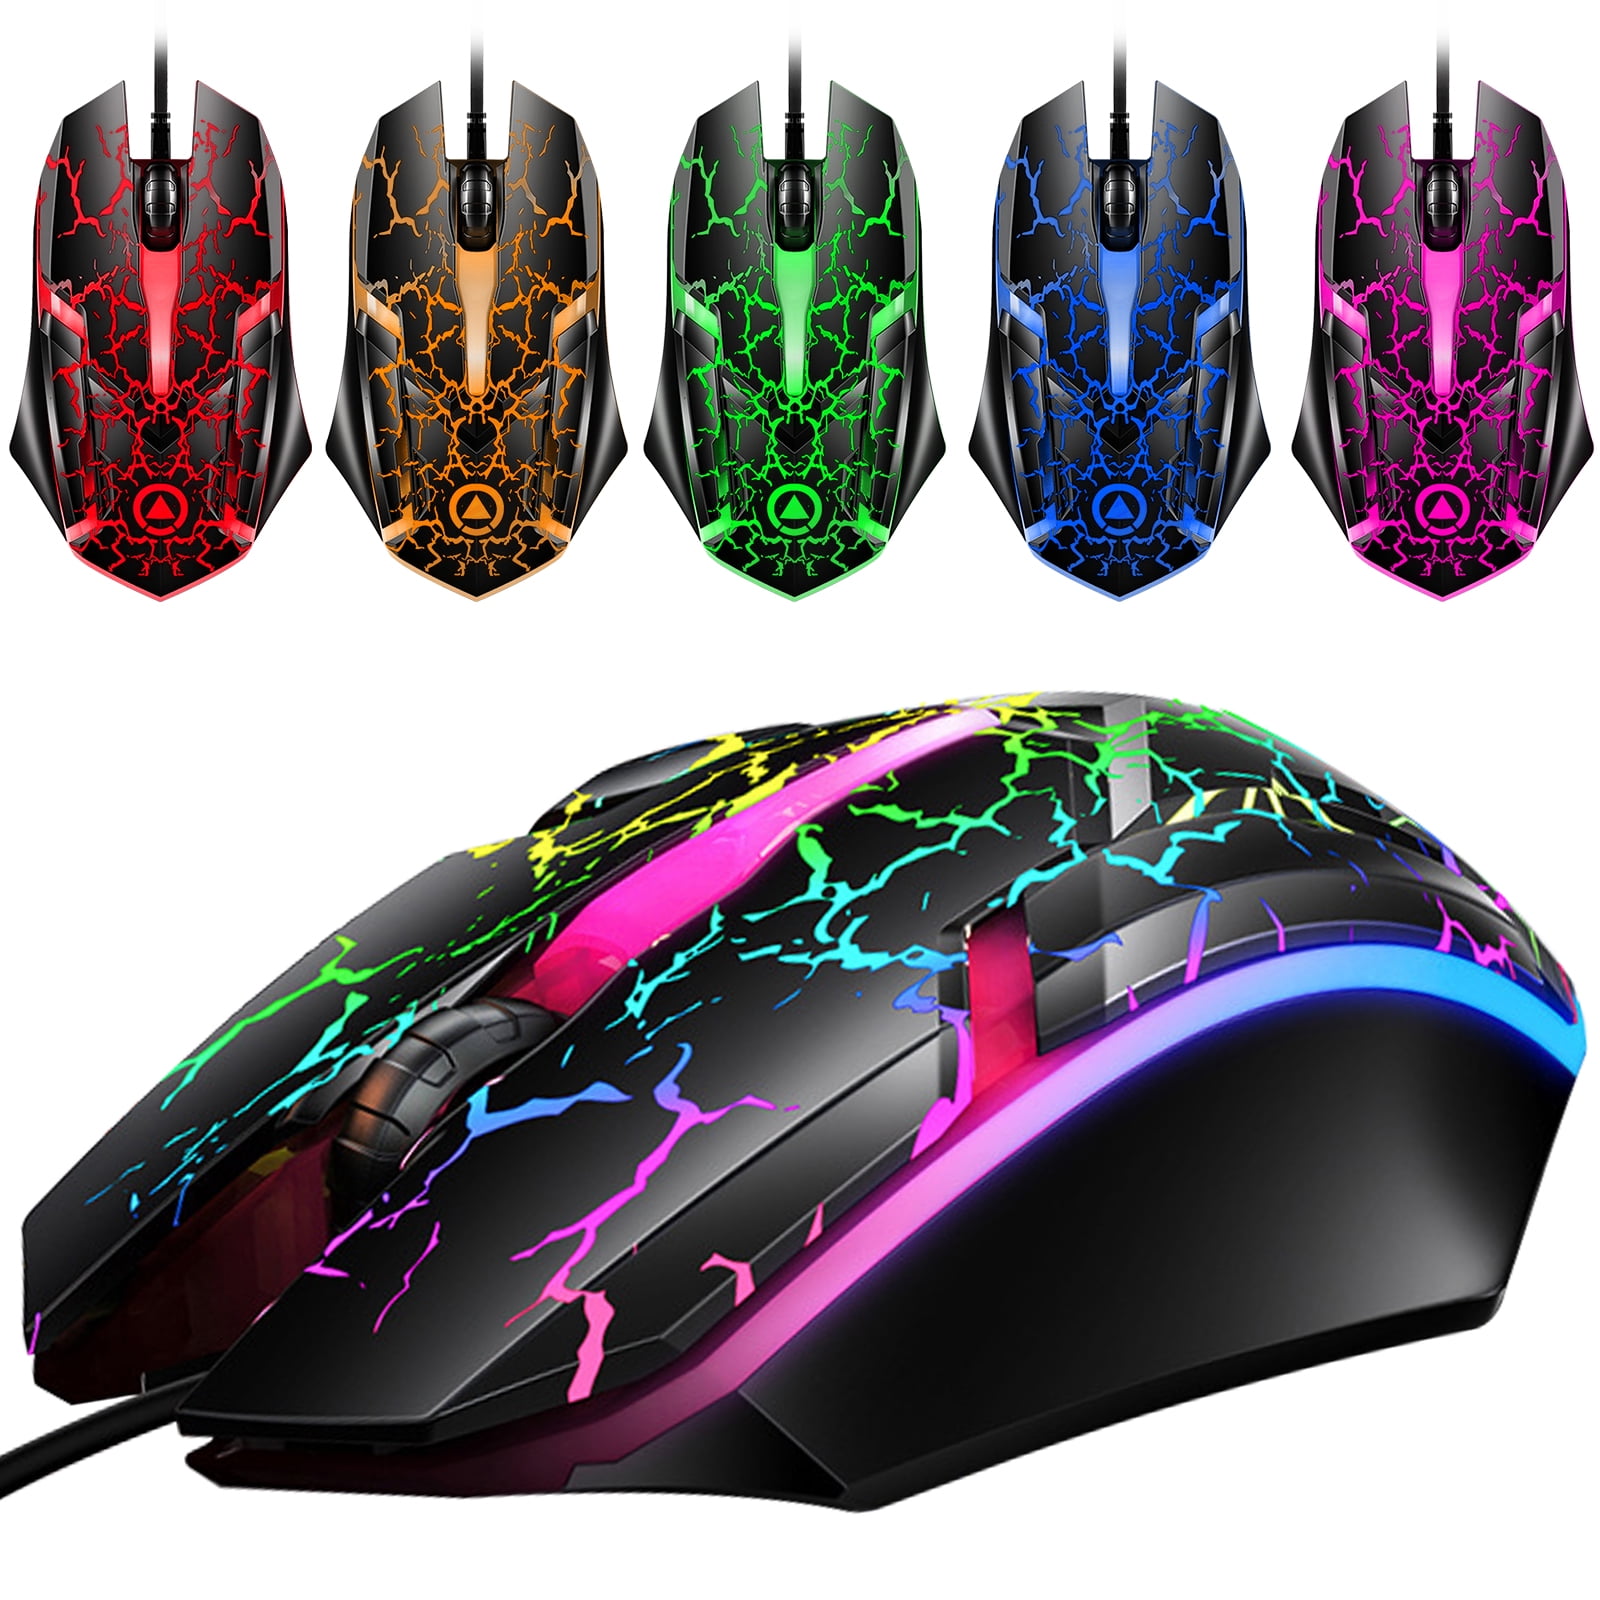 TSV RGB Gaming Mouse, Wired USB Computer Mice, PC Gaming Mice, Ergonomic  Optical Mice with 4 Adjustable DPI, RGB Backlit LED for Desktop, Laptop